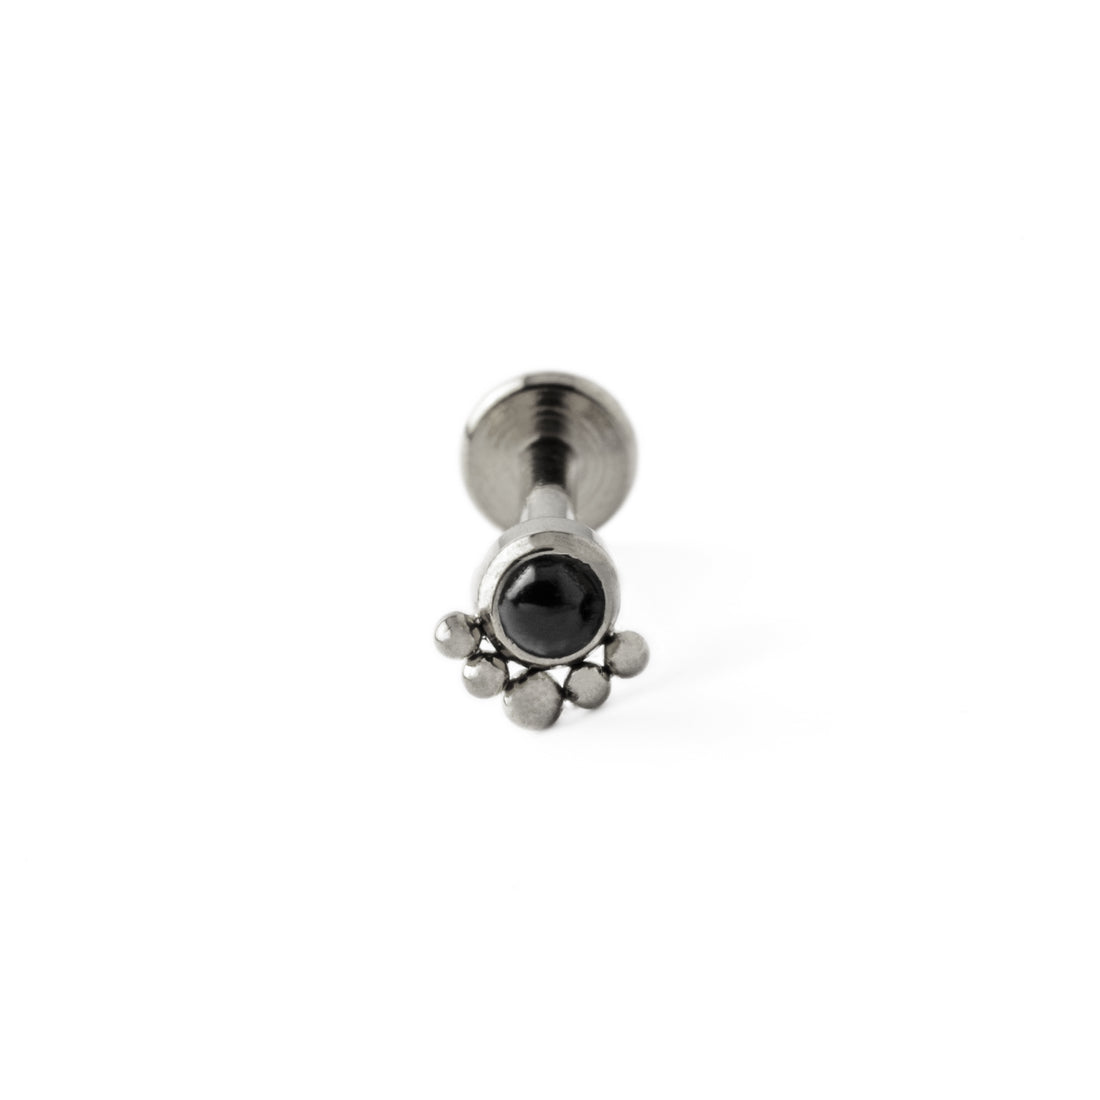 Layla surgical steel internally threaded labret with black Onyx frontal view